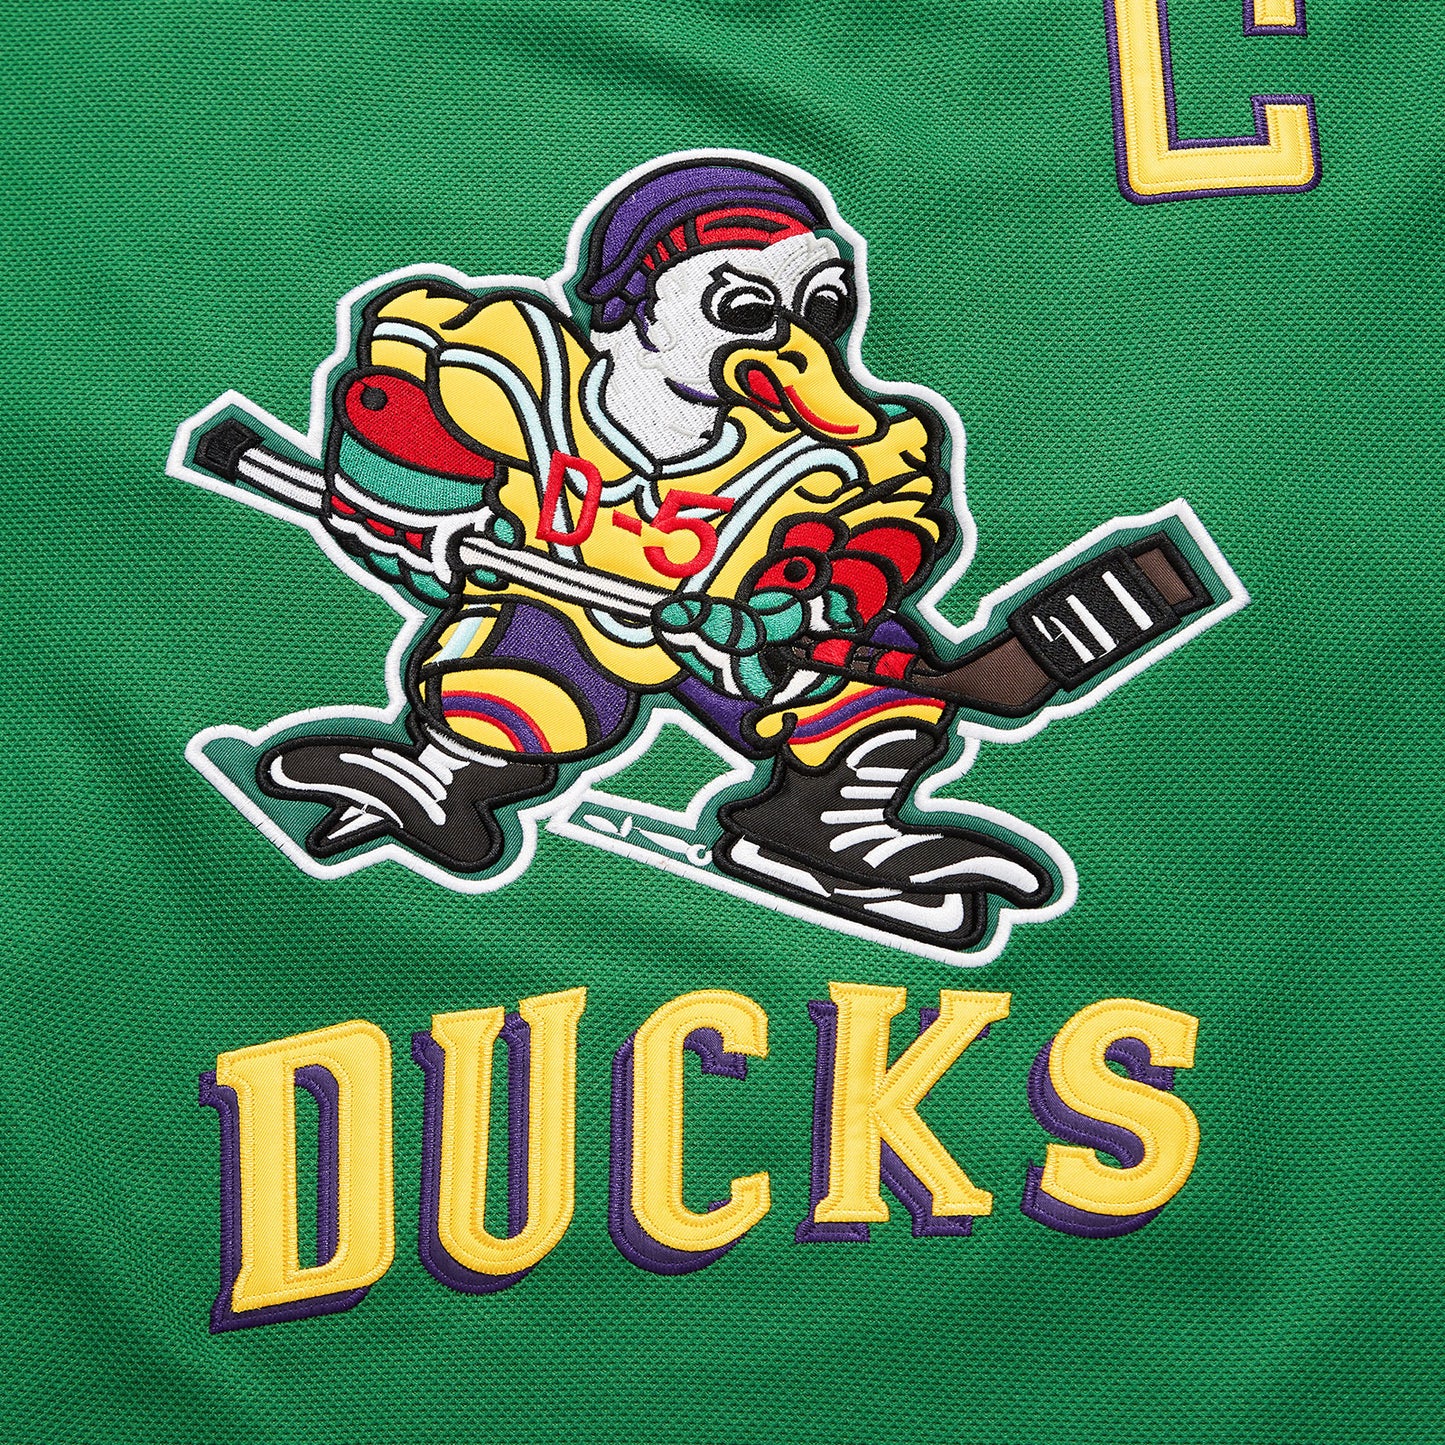 Banks & Conway Mighty Ducks Jersey